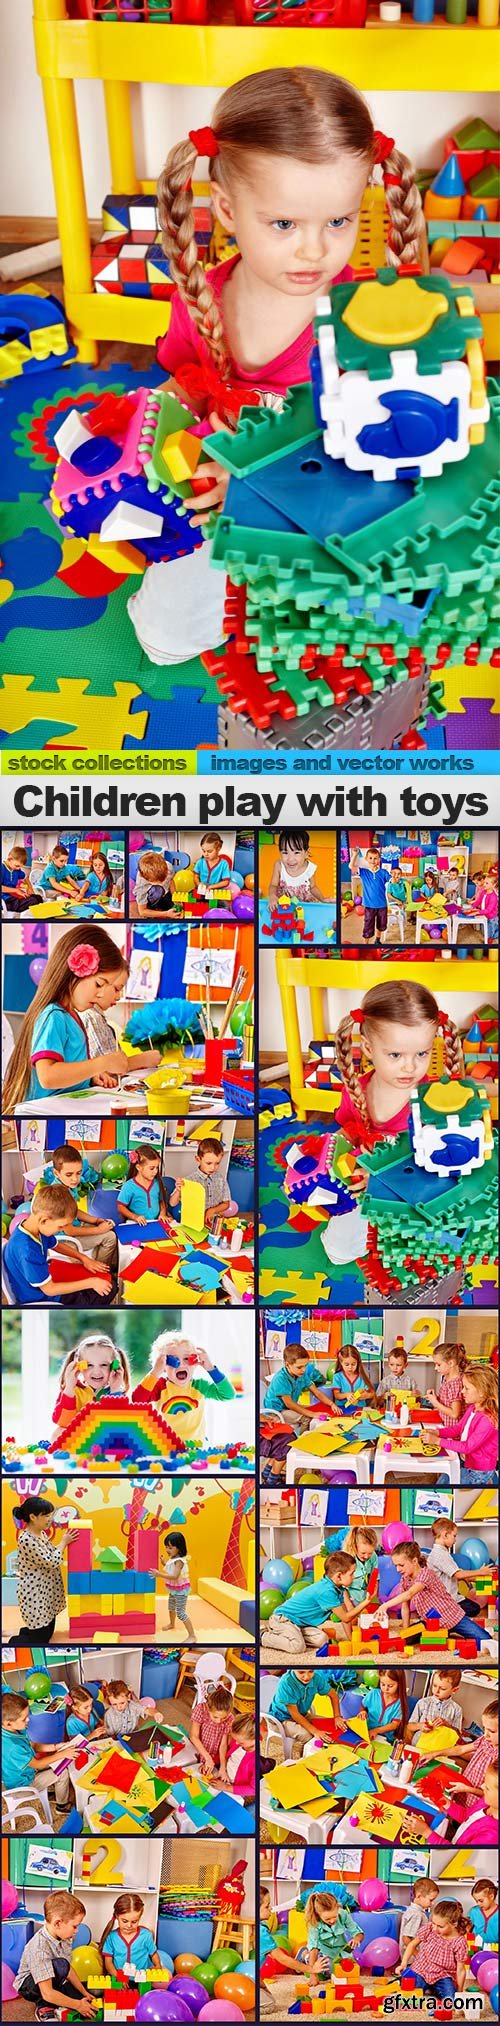 Children play with toys, 15 x UHQ JPEG